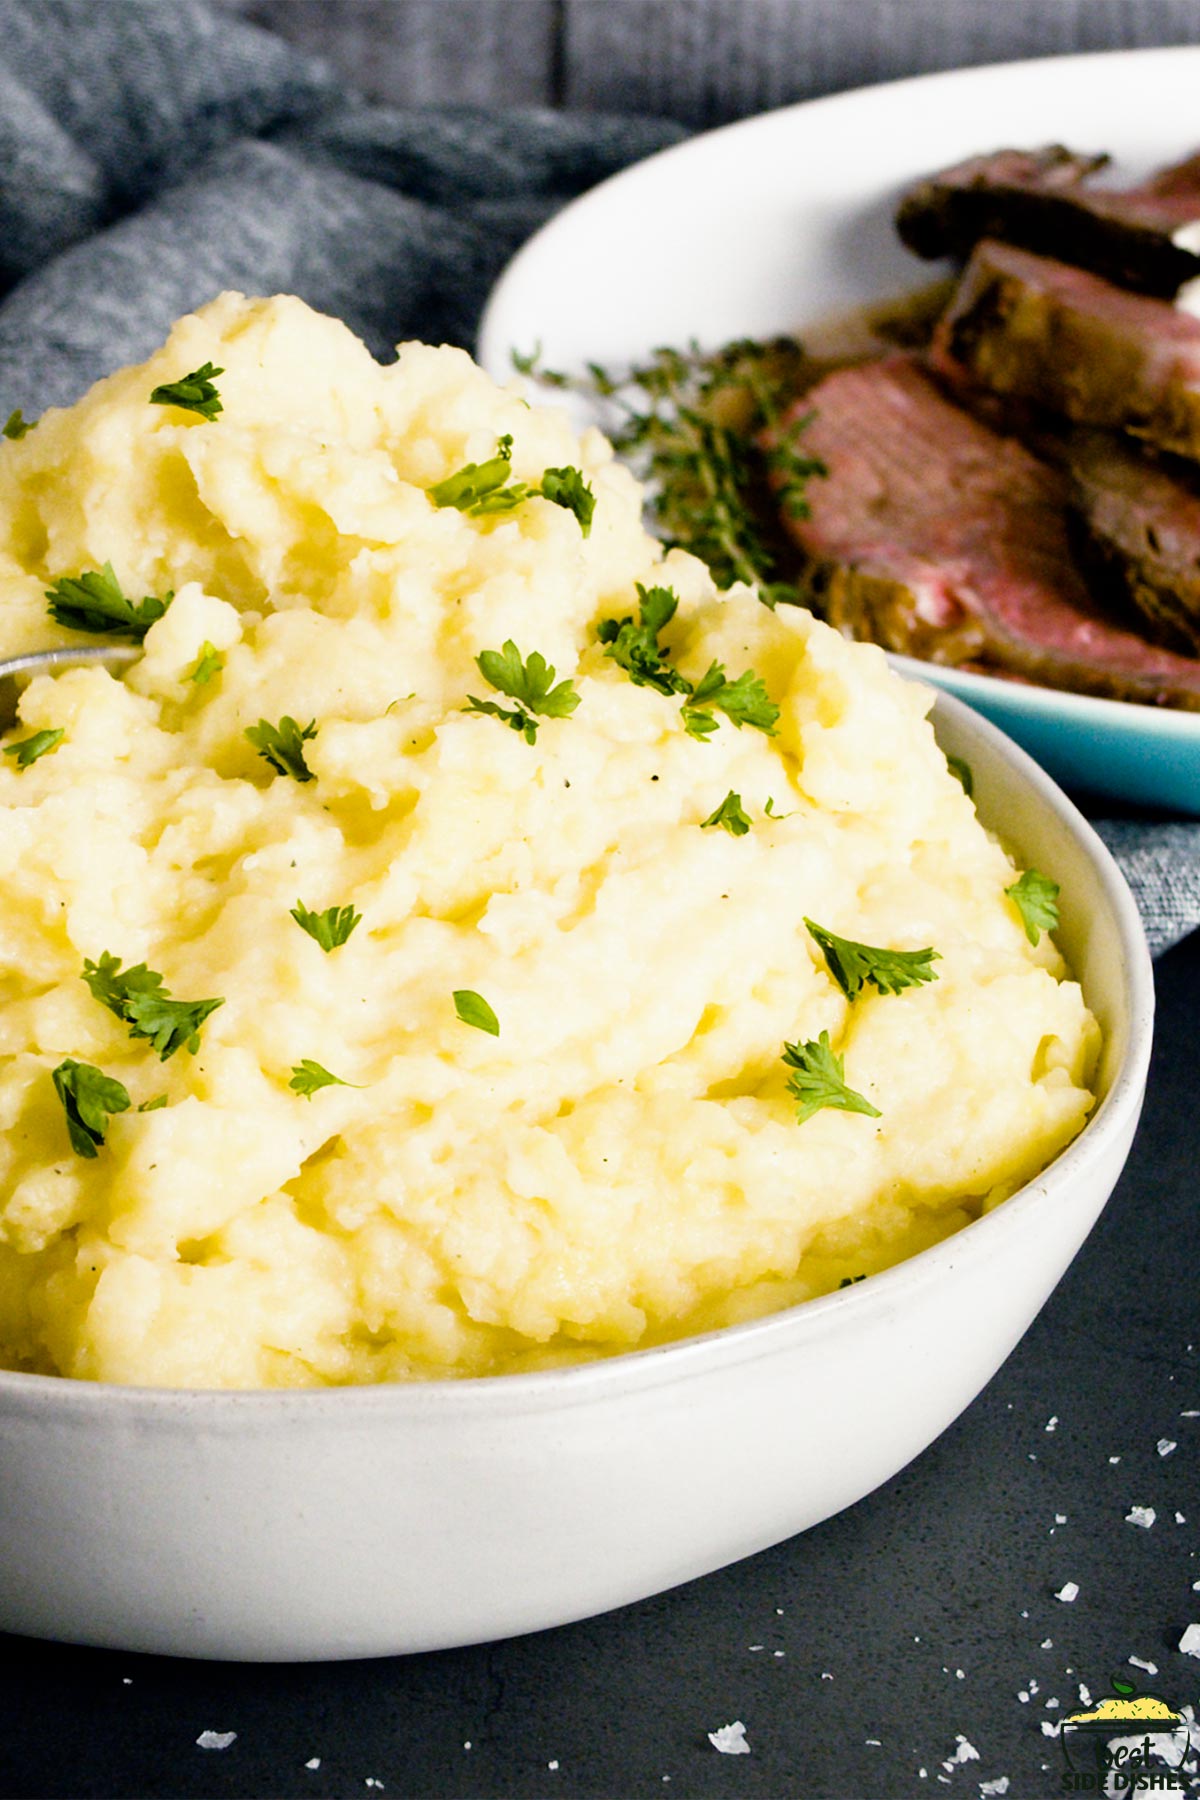 Creamy garlic mashed potatoes piled in a bowl with chives, next to roast beef